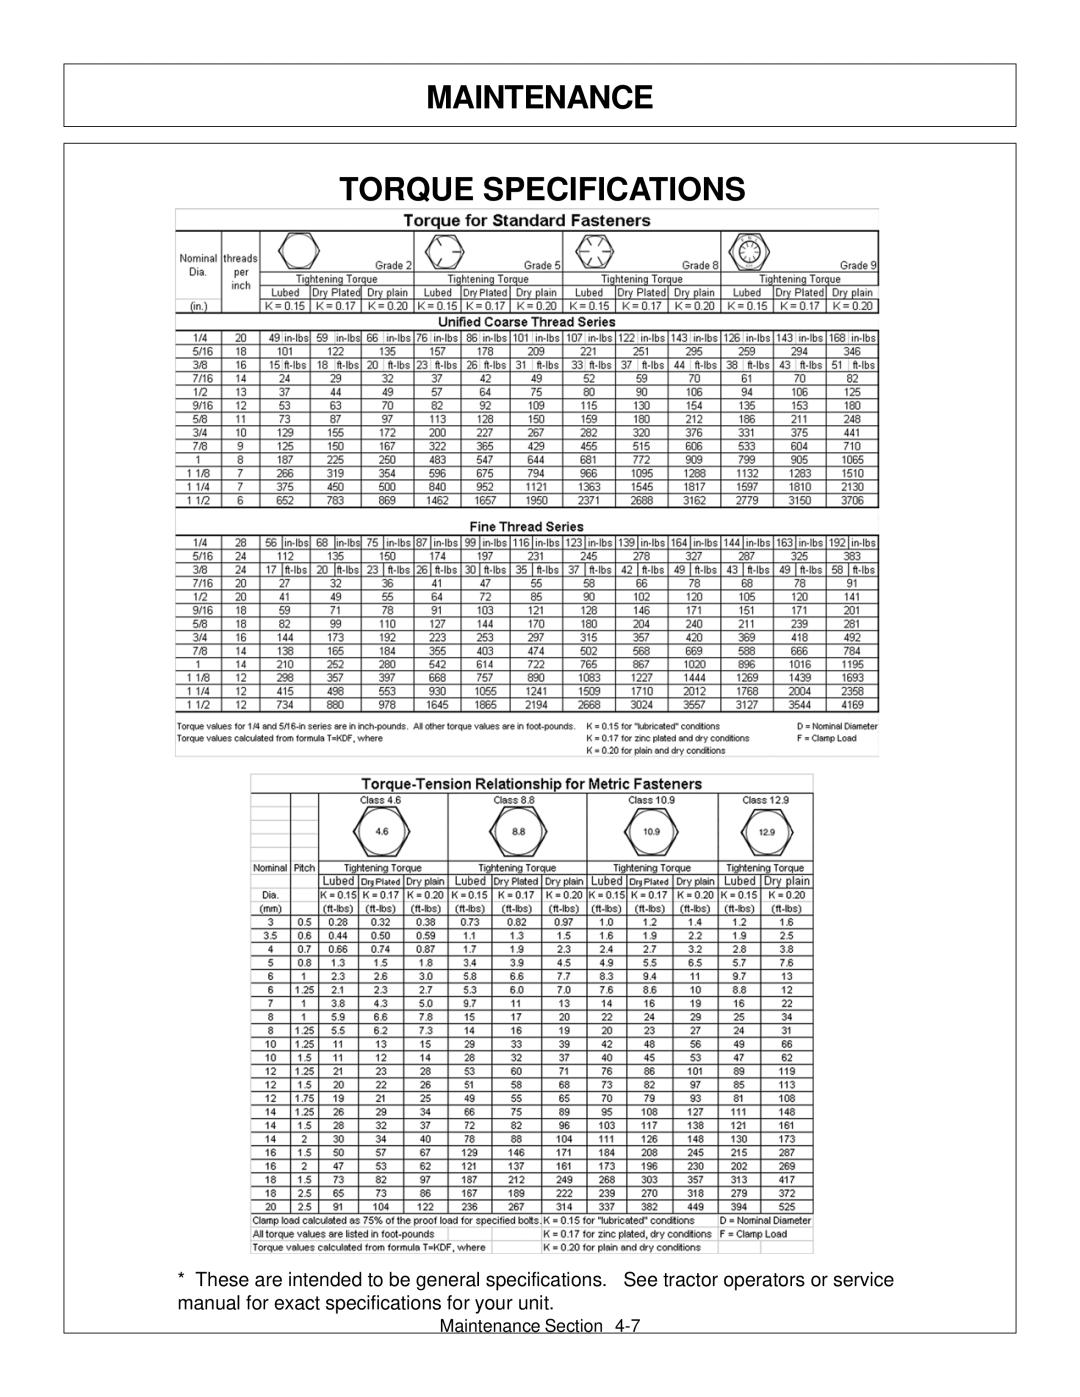 Tiger Products Co., Ltd TS 100A manual Maintenance Torque Specifications 